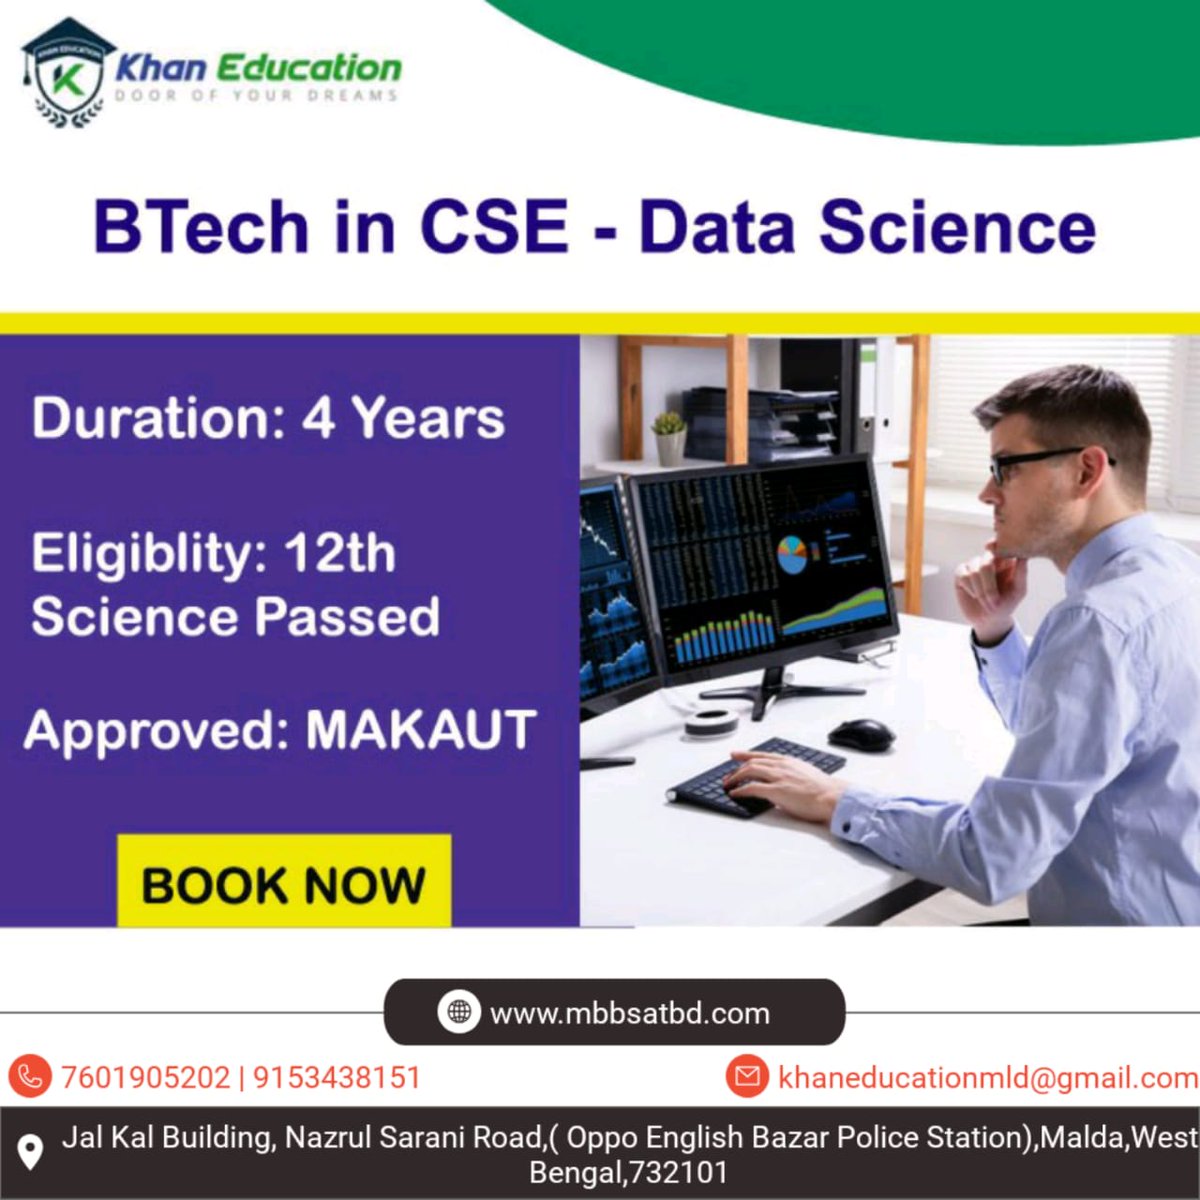 B.Tech in CSE- Data Science 2022 (Admission Open)
For Inquiry No:-
(+91) 7601905202
Helpline No :-
(+91) 9153438151
khaneducation.in
khaneducational@gmail.com
#Btechcsedatascience
#bsccriticalcare
#bscdatascience
#AdmissionConsultant